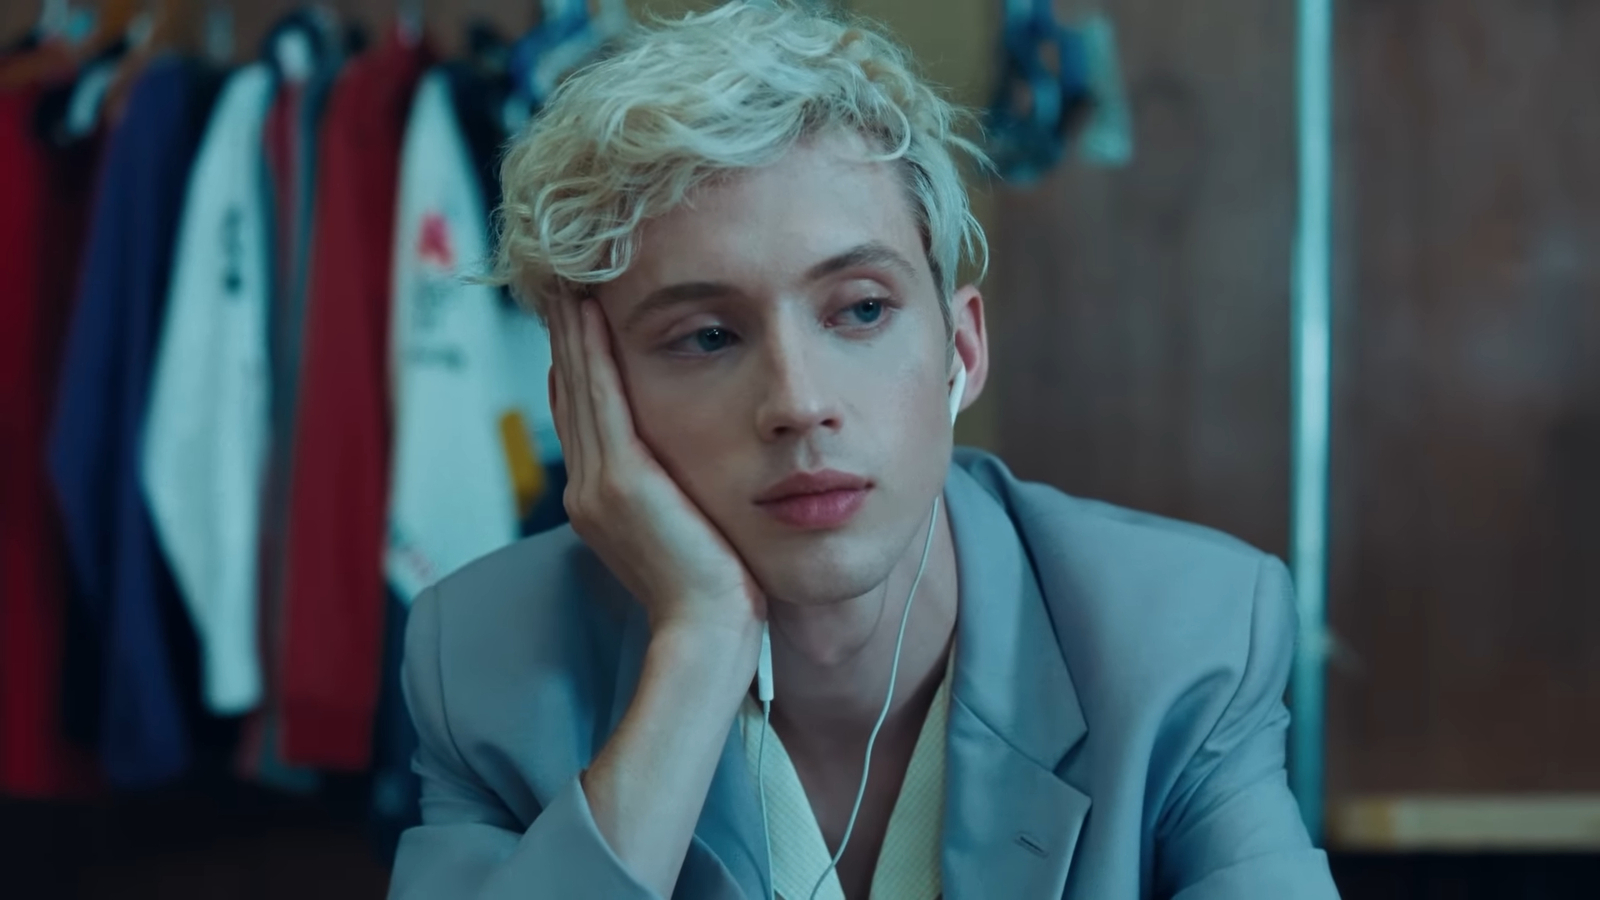 Troye Sivan in the 'Dance to This' music video